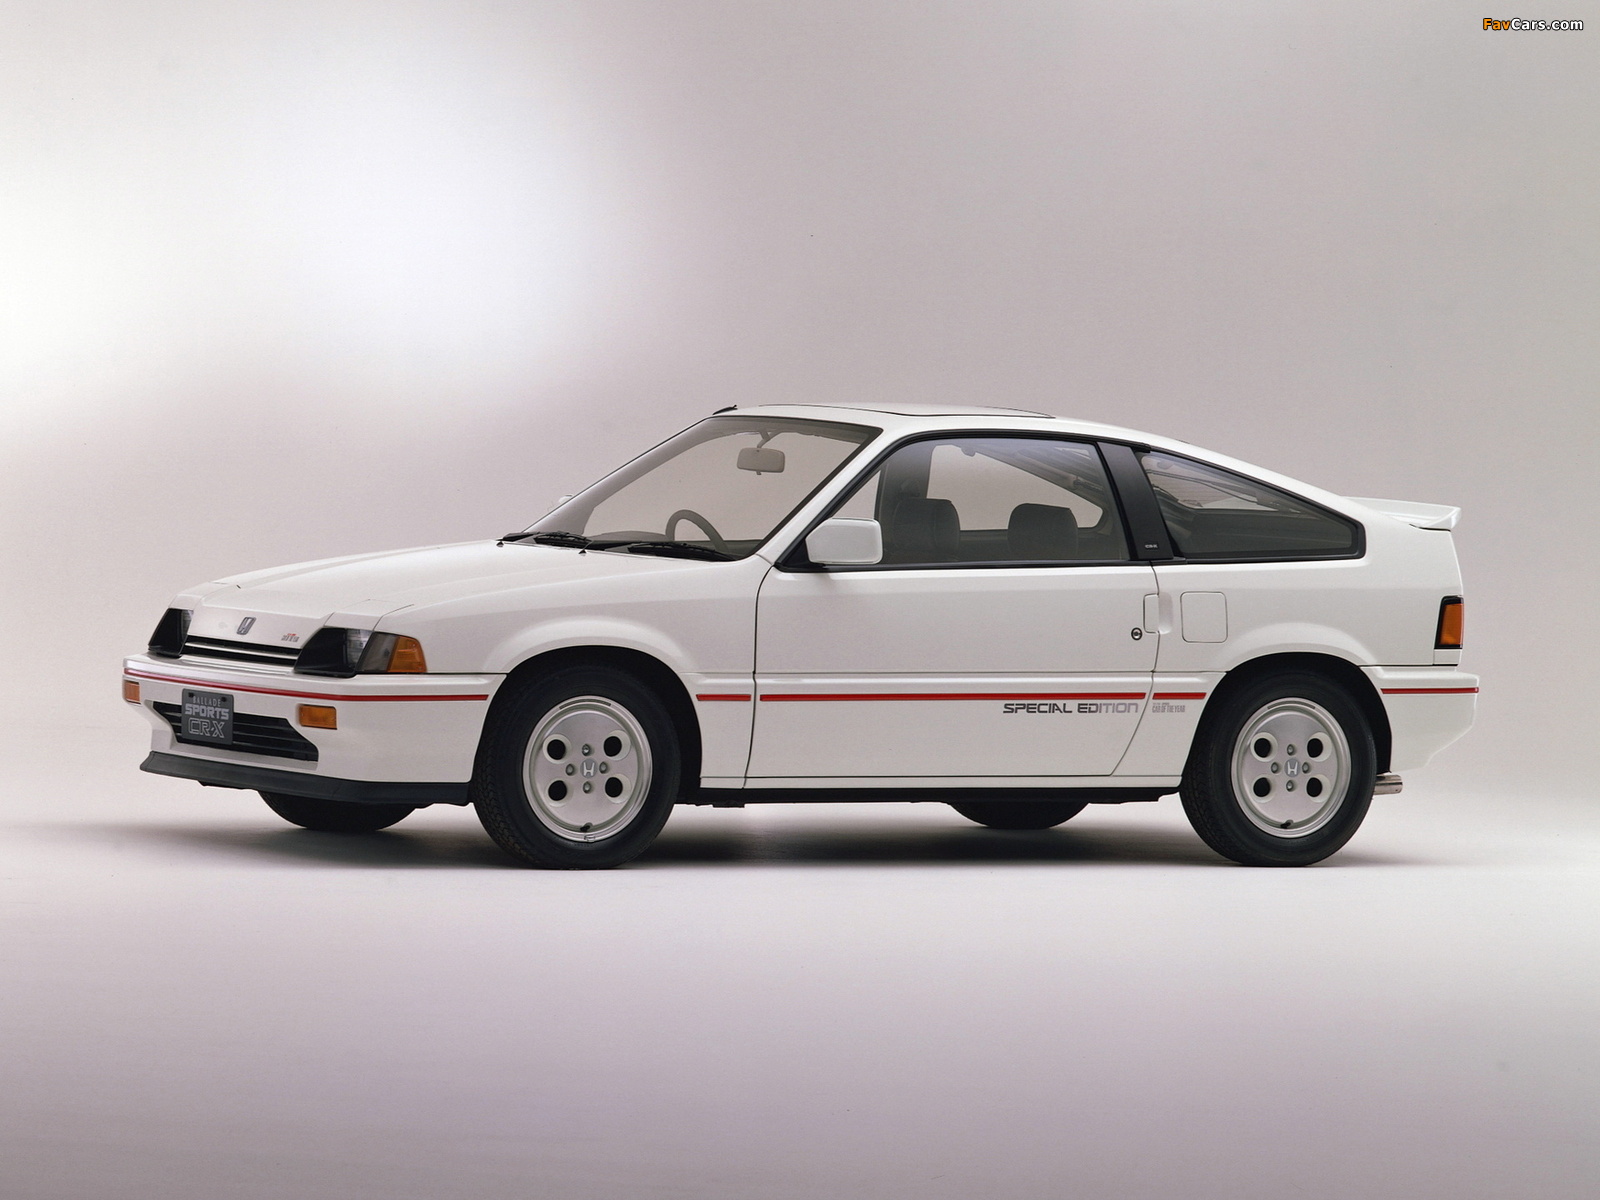 Honda Ballade Sports CR-X Special Edition 1984 pictures (1600 x 1200)